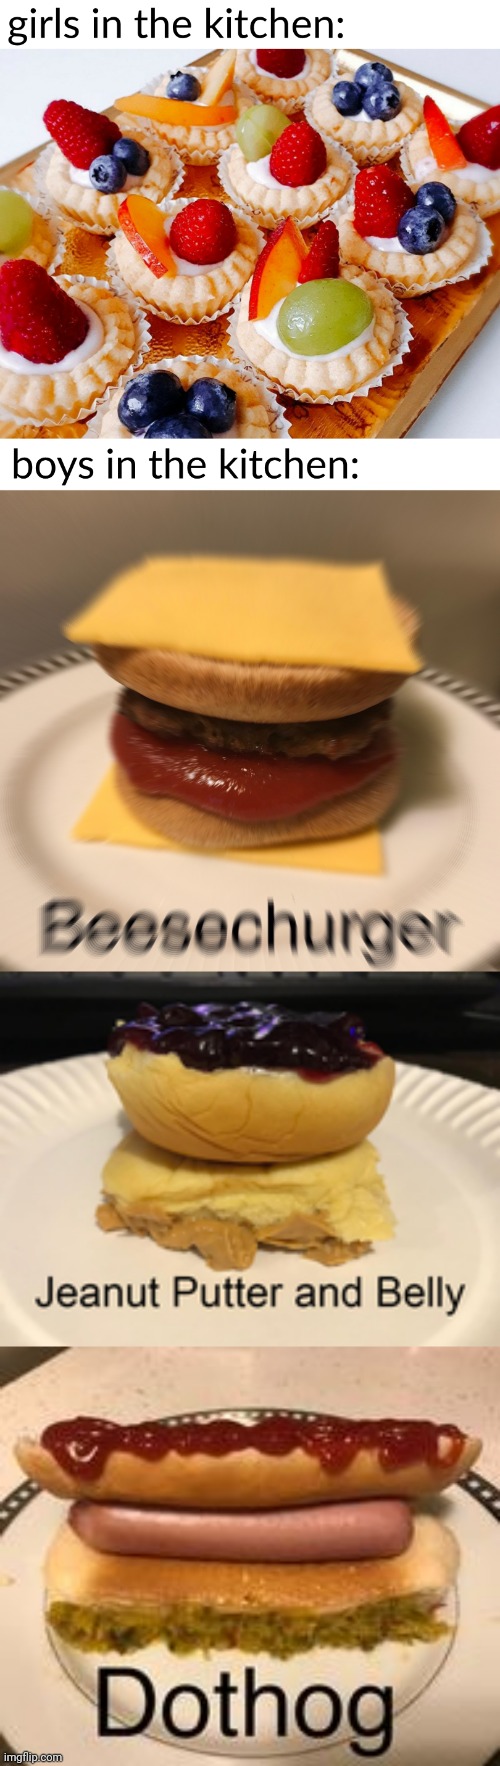 image tagged in beesechurger,cheeseburger,peanut butter,jelly,hotdog | made w/ Imgflip meme maker